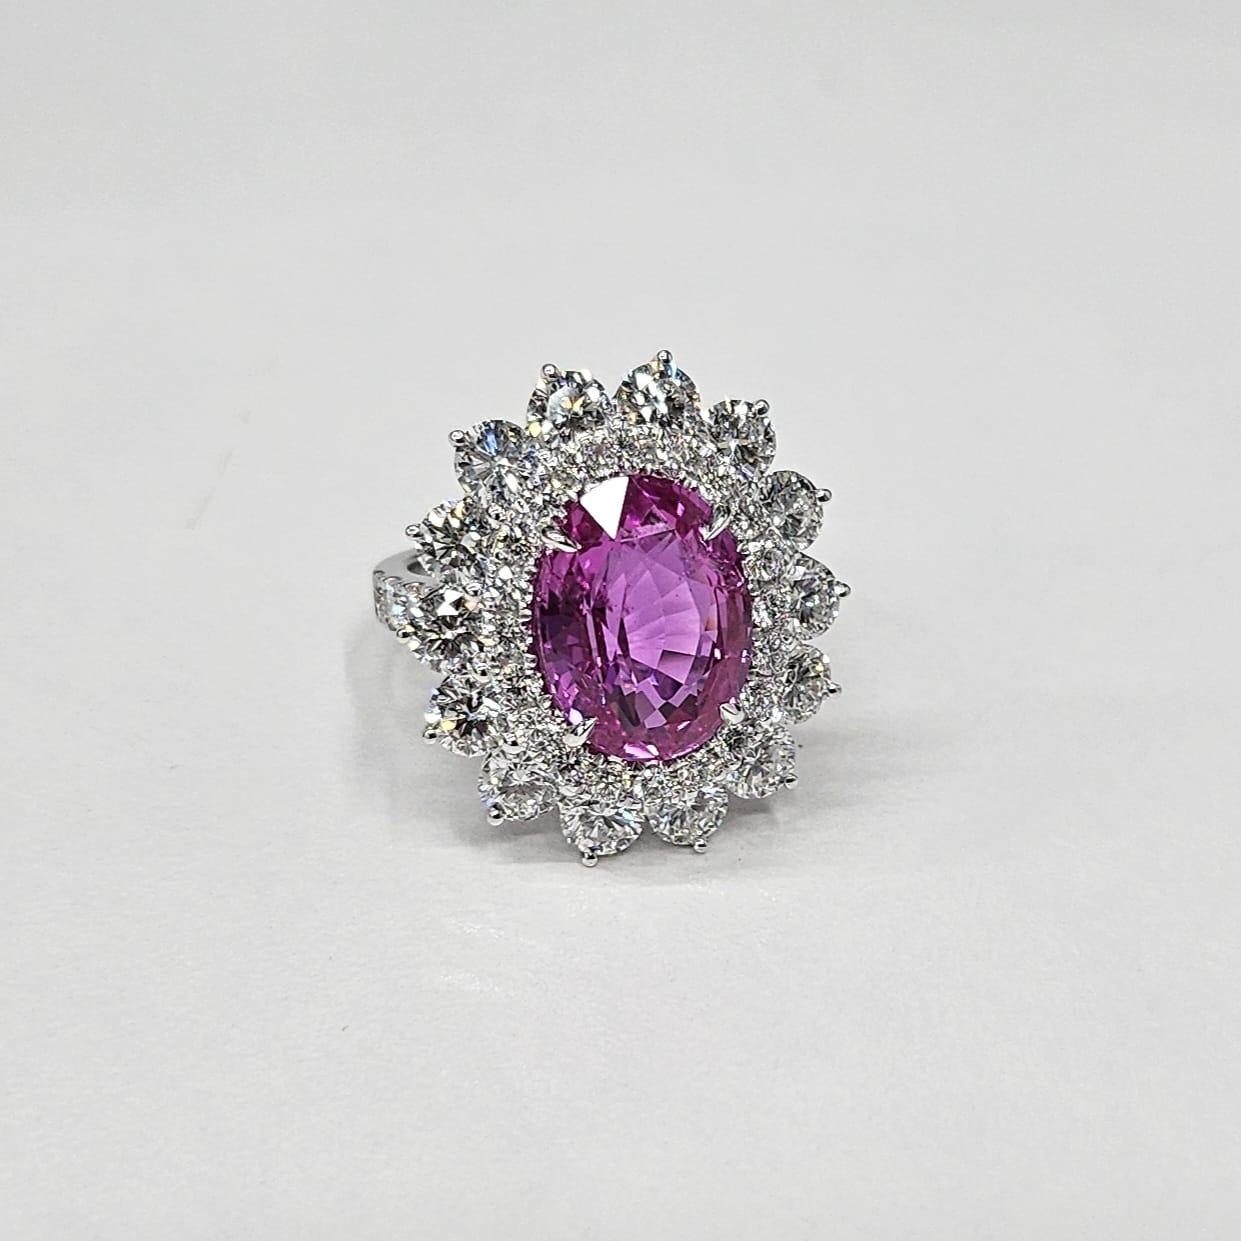 GRS Certified 5.81 Ct Pink Sapphire & 3.59 Ct Diamond Ring in 18K White Gold For Sale 4